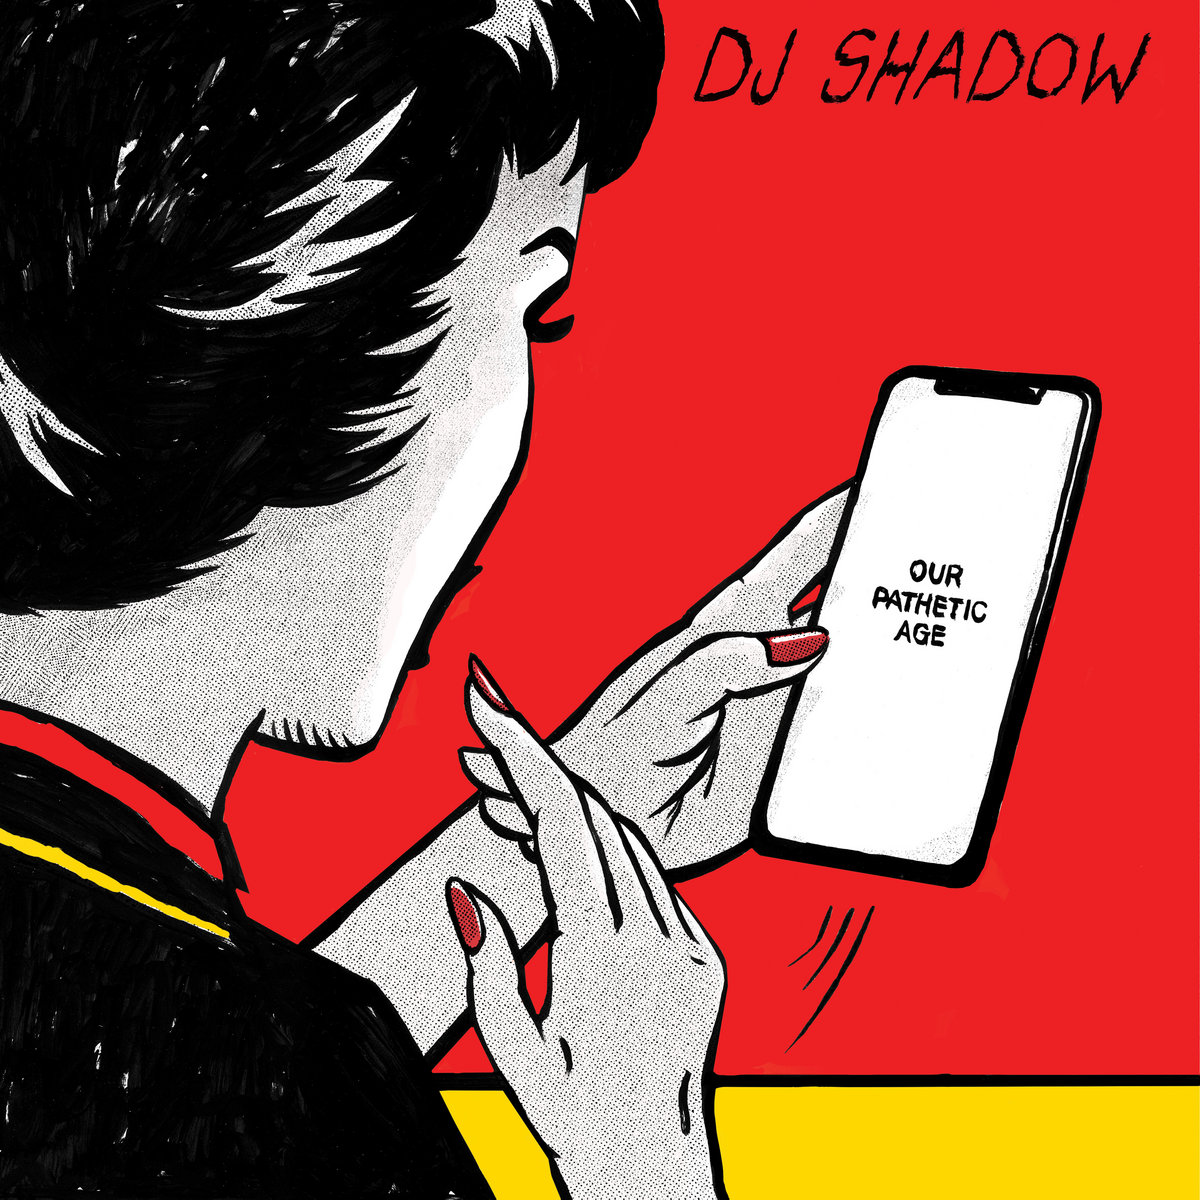 DJ Shadow Our Pathetic Age cover artwork